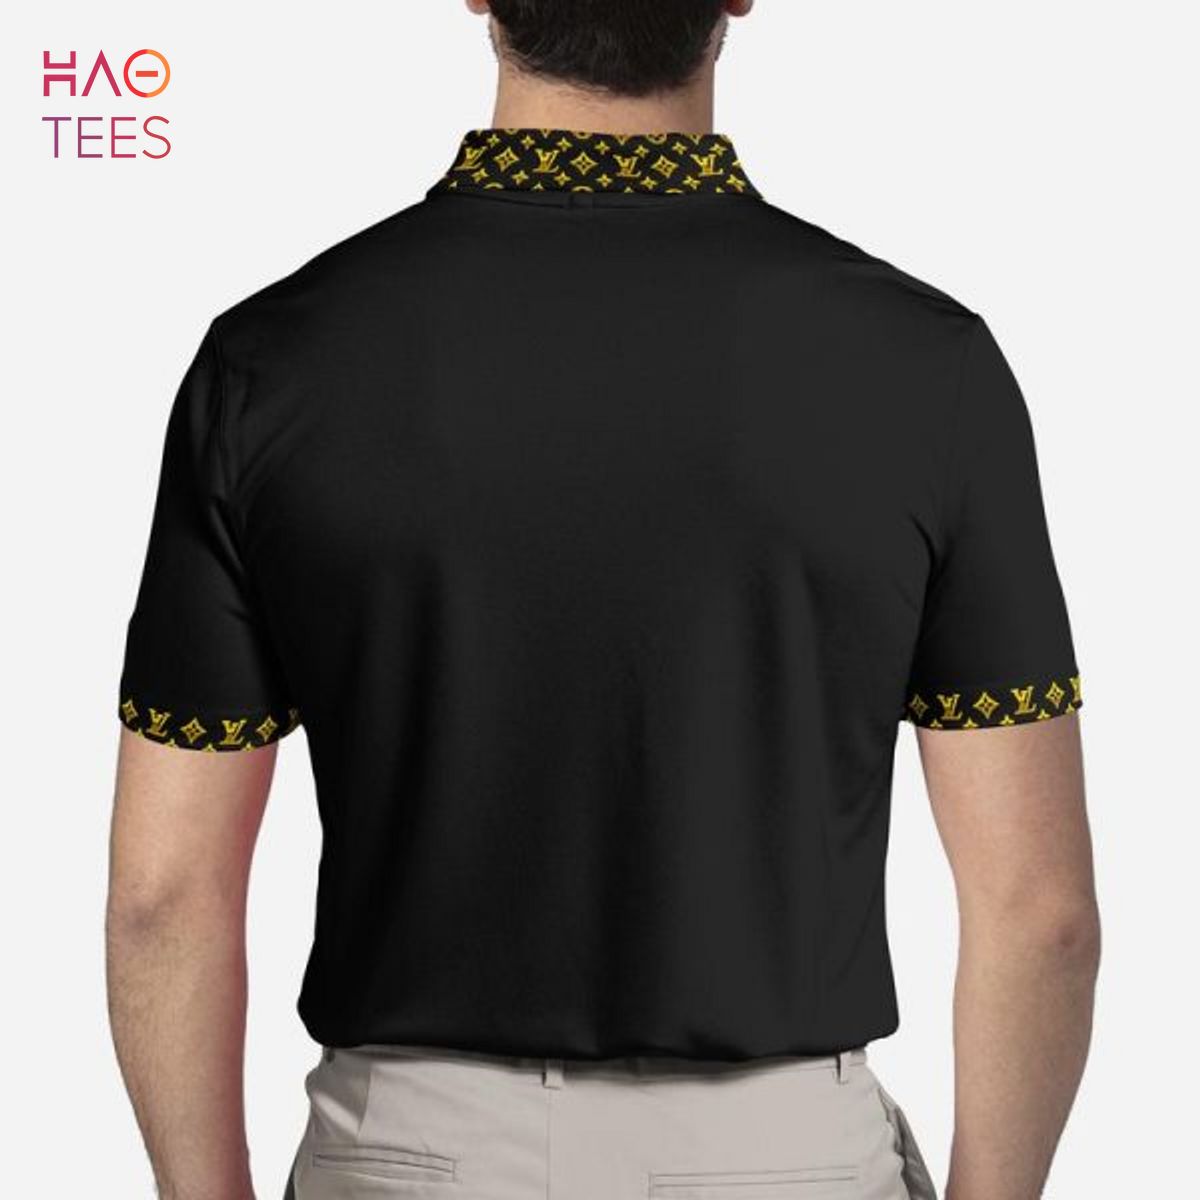 Louis Vuitton Embroidered Signature Polo